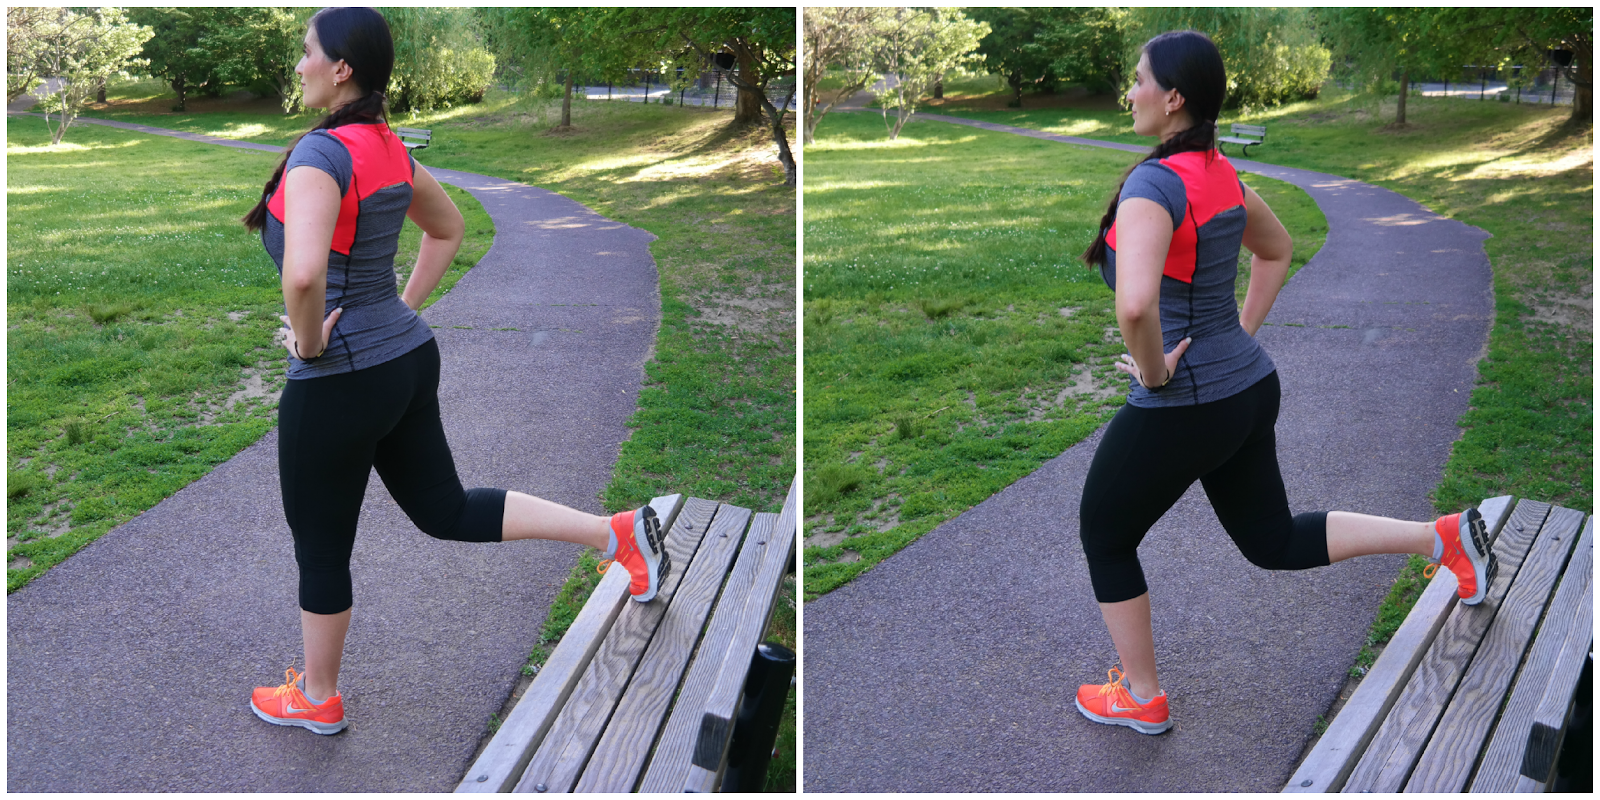 The Park Bench Workout